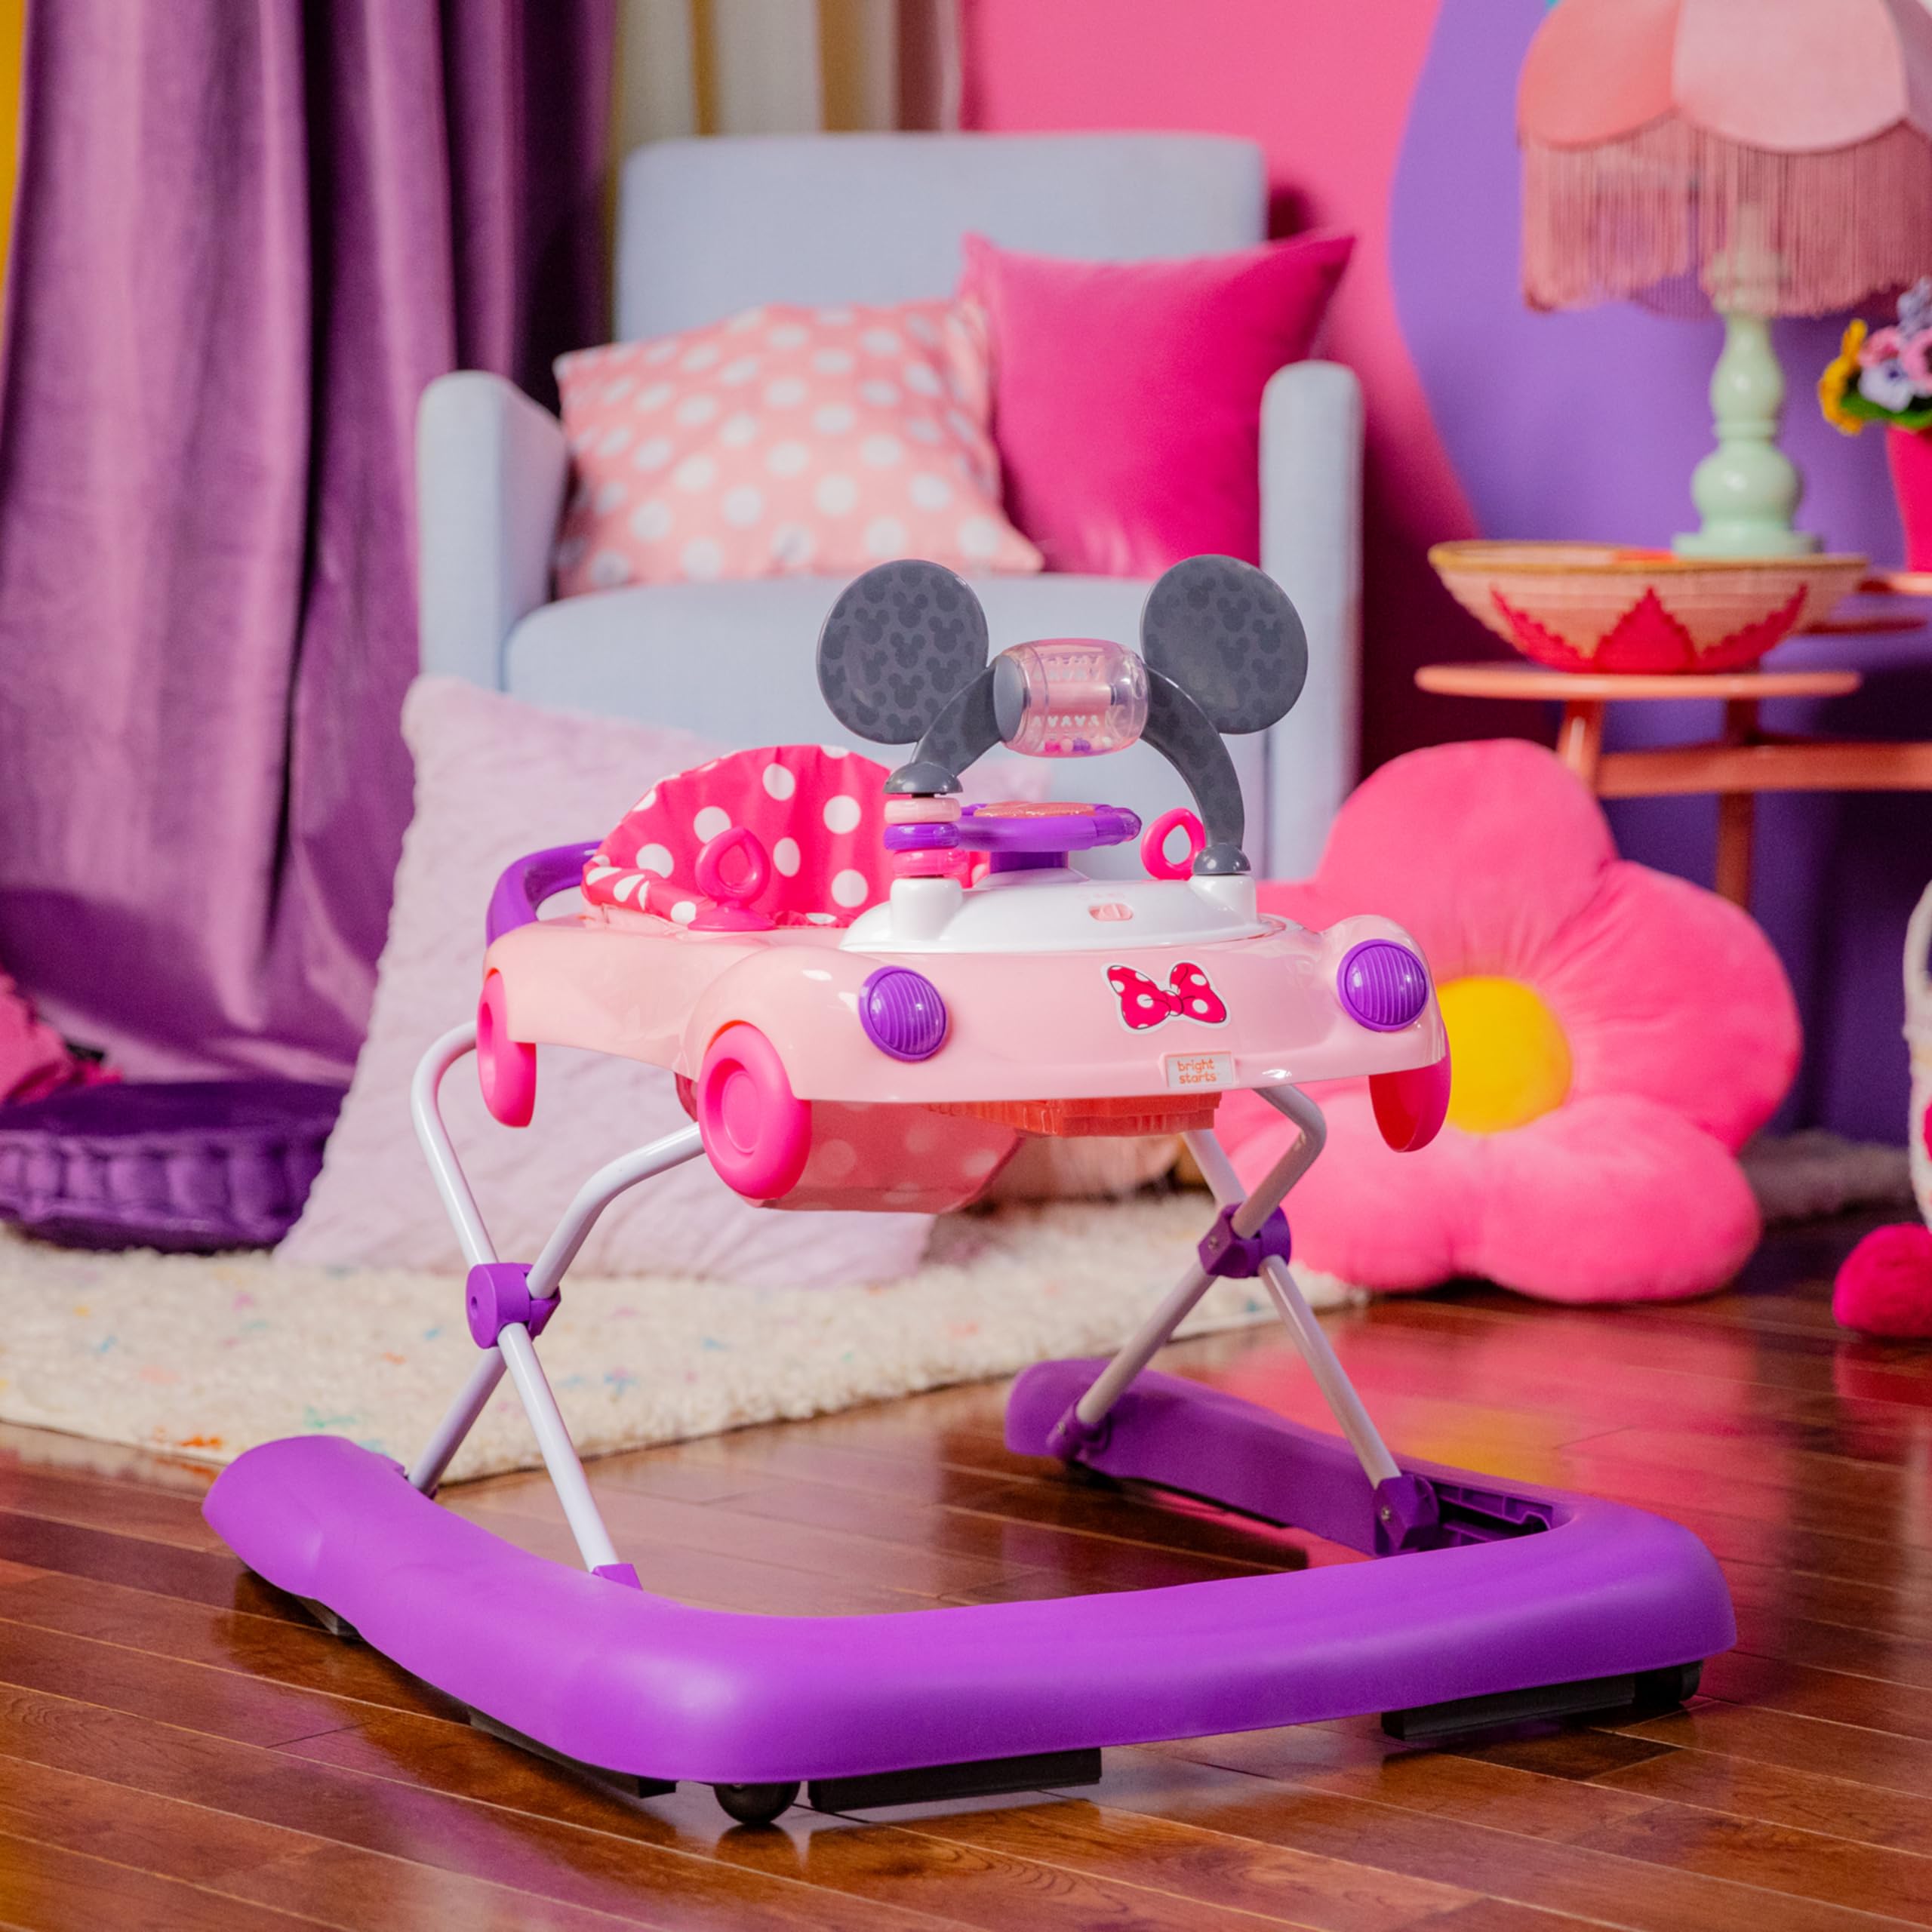 Bright Starts Disney Baby Minnie Mouse Go, Go Bows 3-in-1 Car Walker, Pink and Purple, 6-24 Months